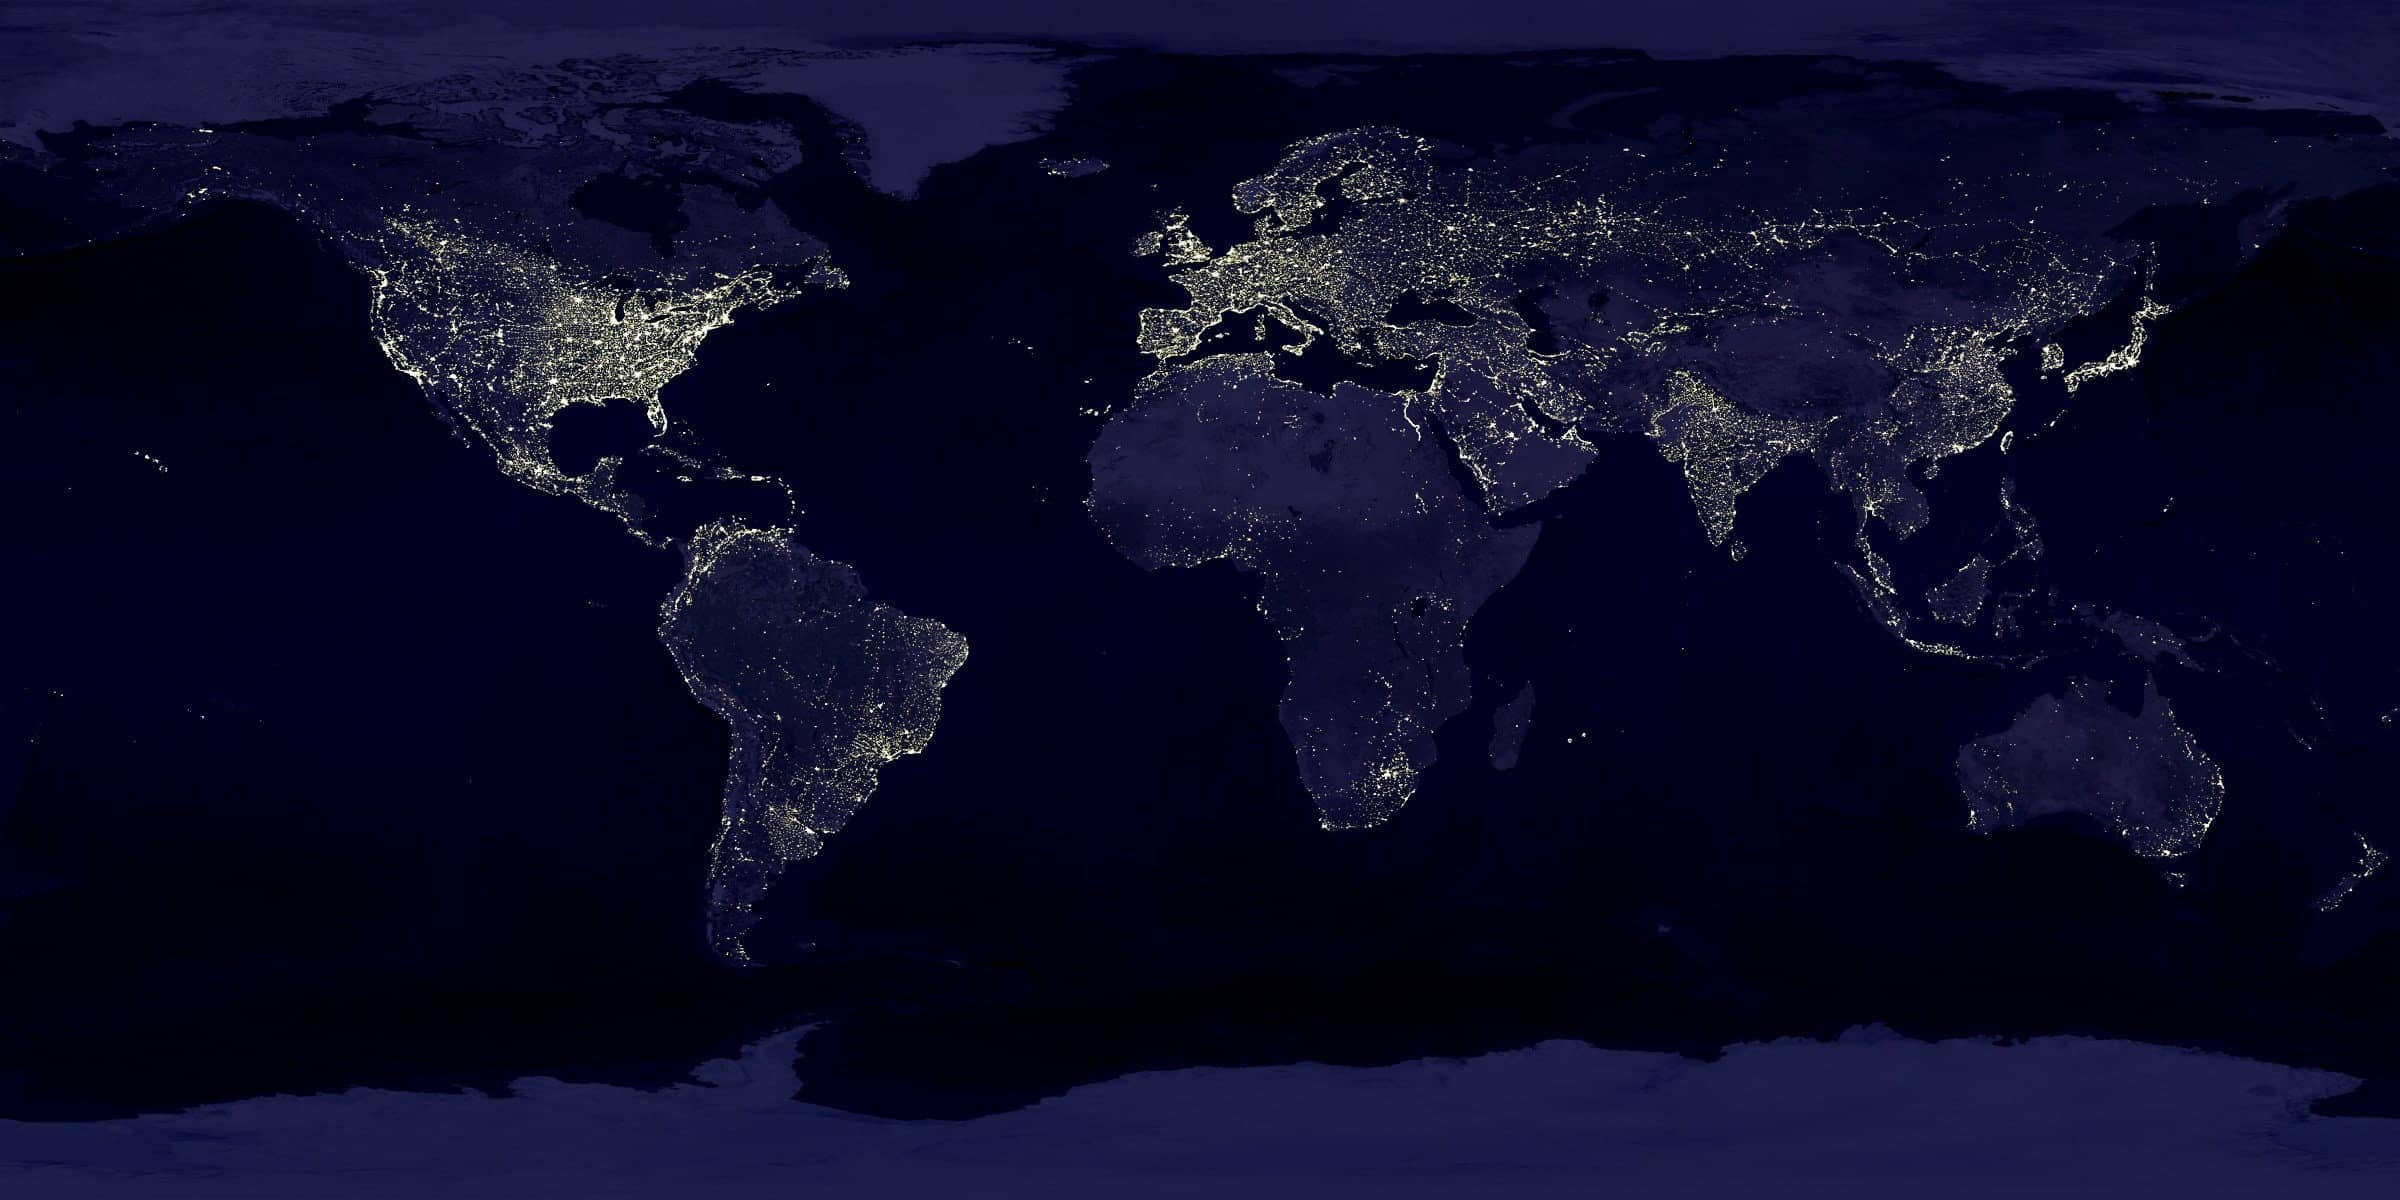 A picture of the globe at night where lights show the population centers and connectivity of the world. This article is about remote monitoring and management or RMM software which helps managed service providers or MSPs assist clients in managing IT environments.